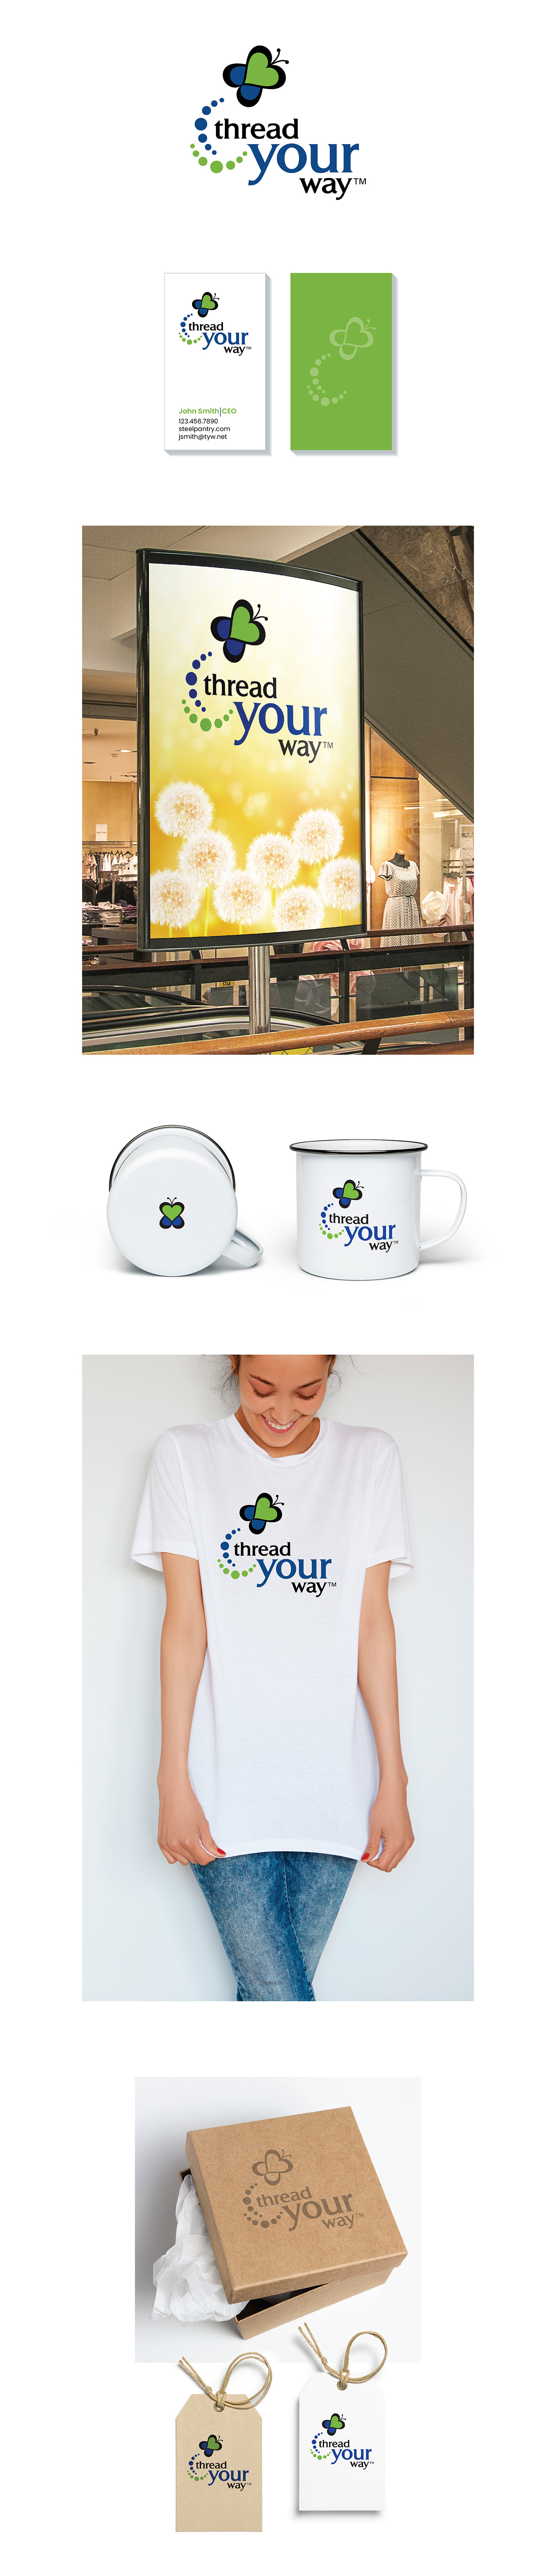 Branding and concept designs for business card, store signage, cups, t-shirt, box and hangtags.